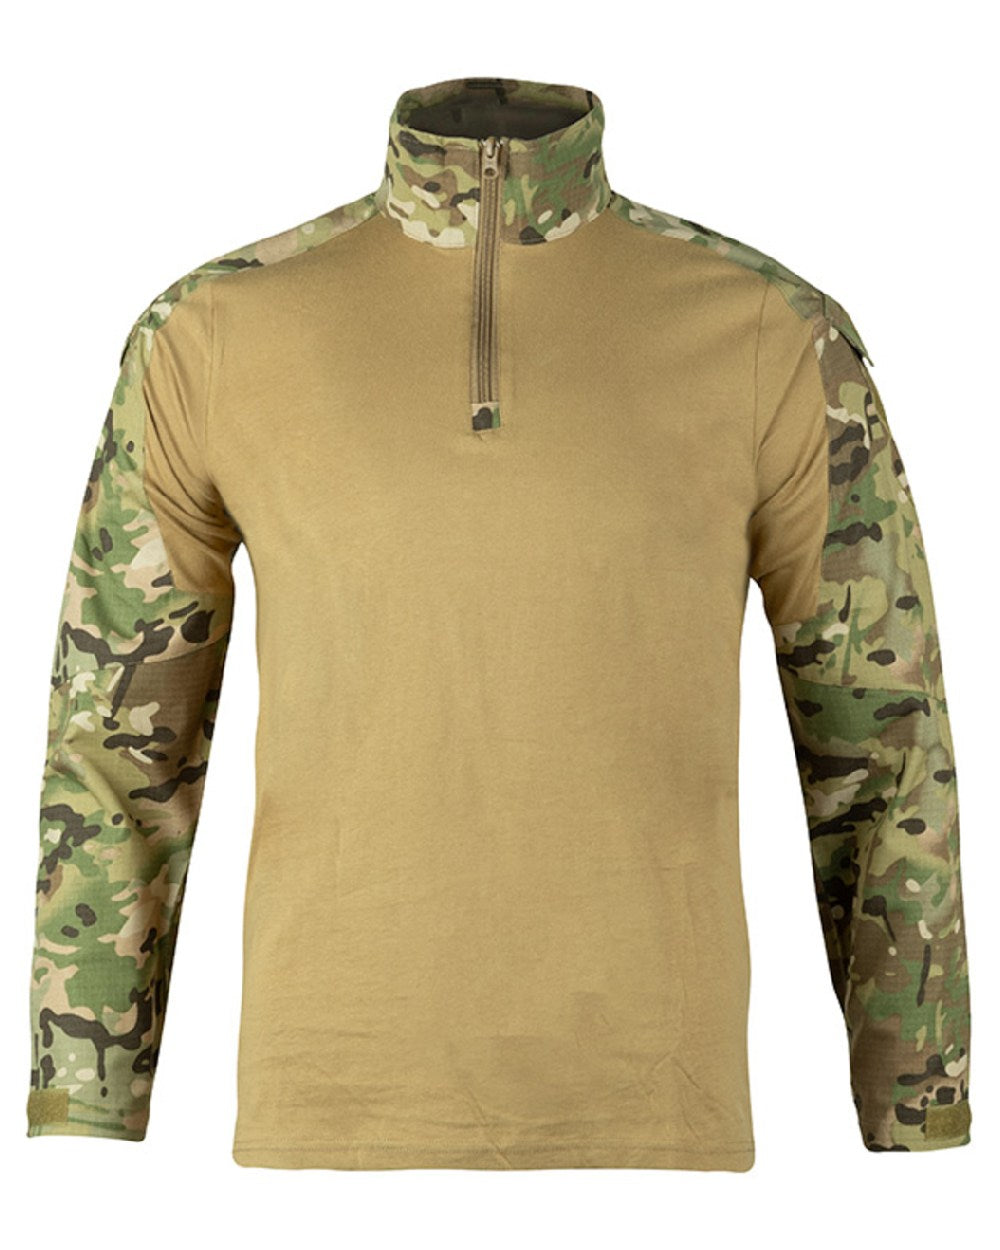 Viper Special Ops Shirt in VCAM 